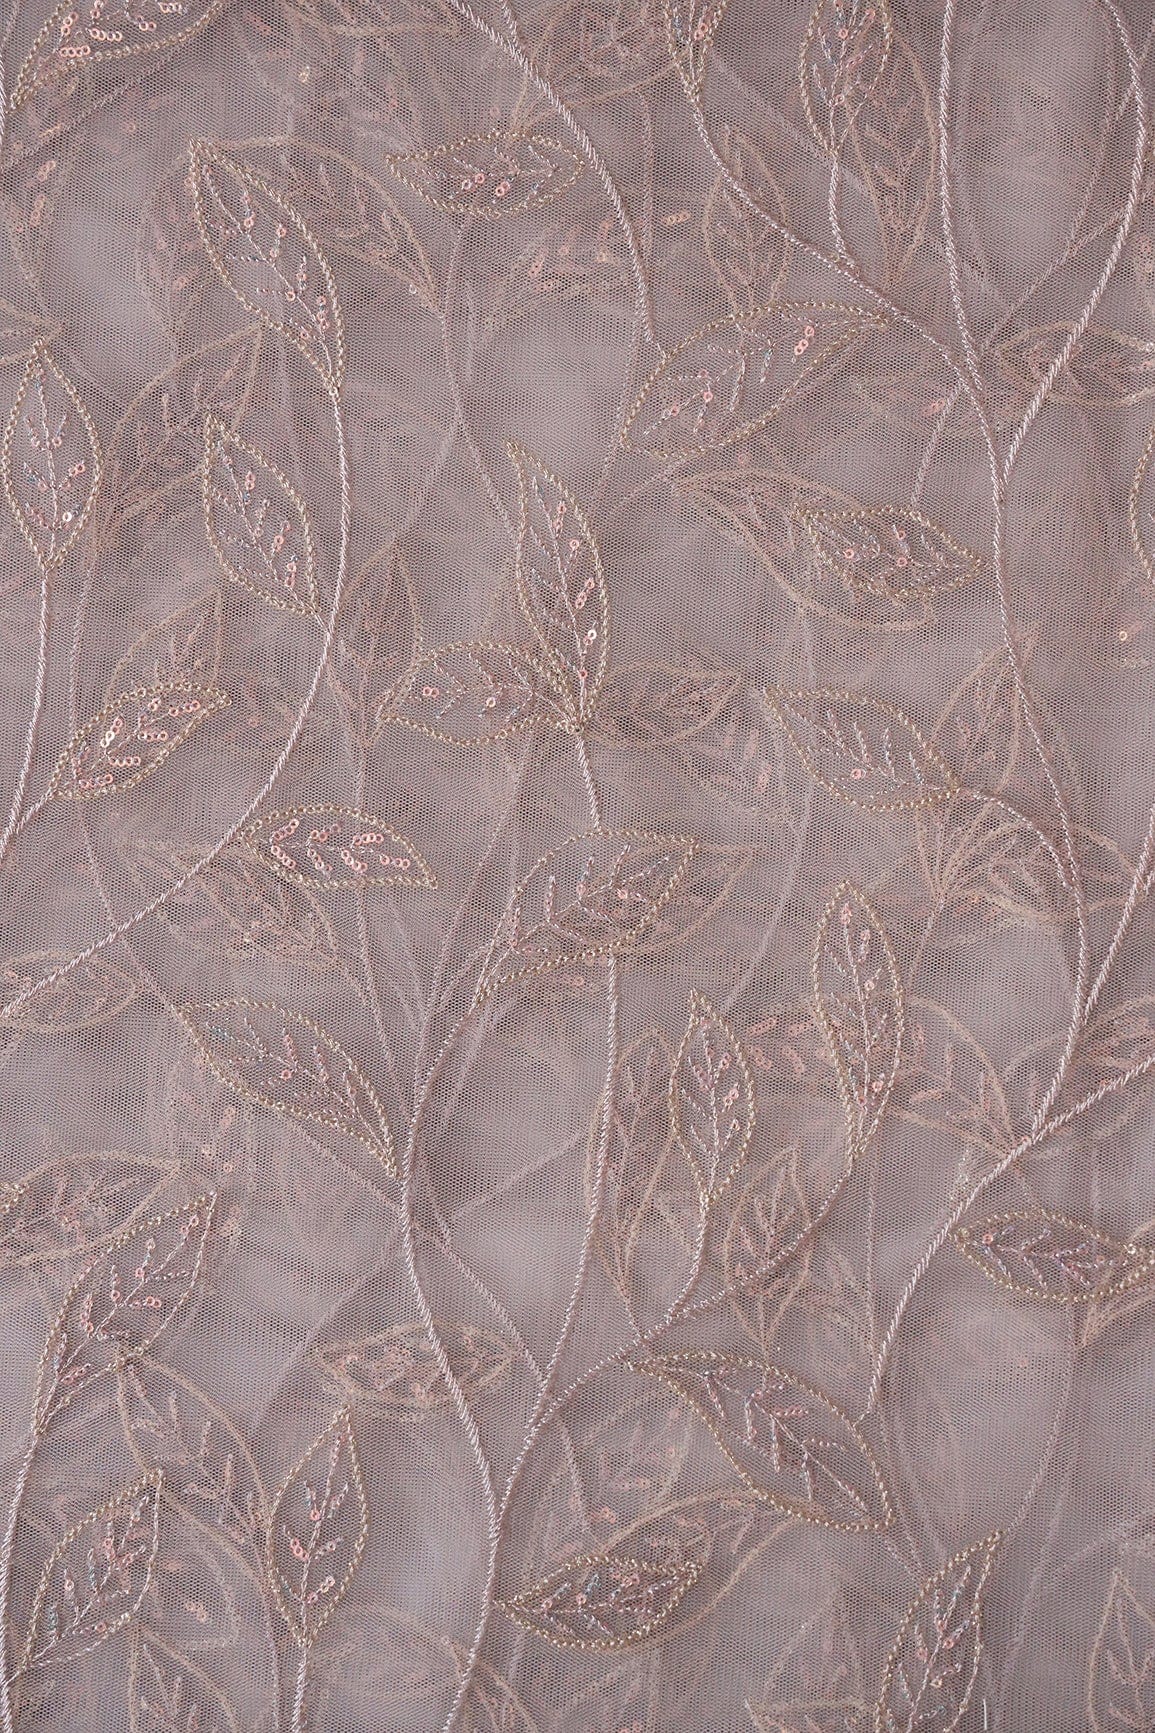 doeraa Embroidery Fabrics 3 Meter Cut Piece Of Grey Thread With Sequins Beautiful Leafy Embroidery On Grey Soft Net Fabric